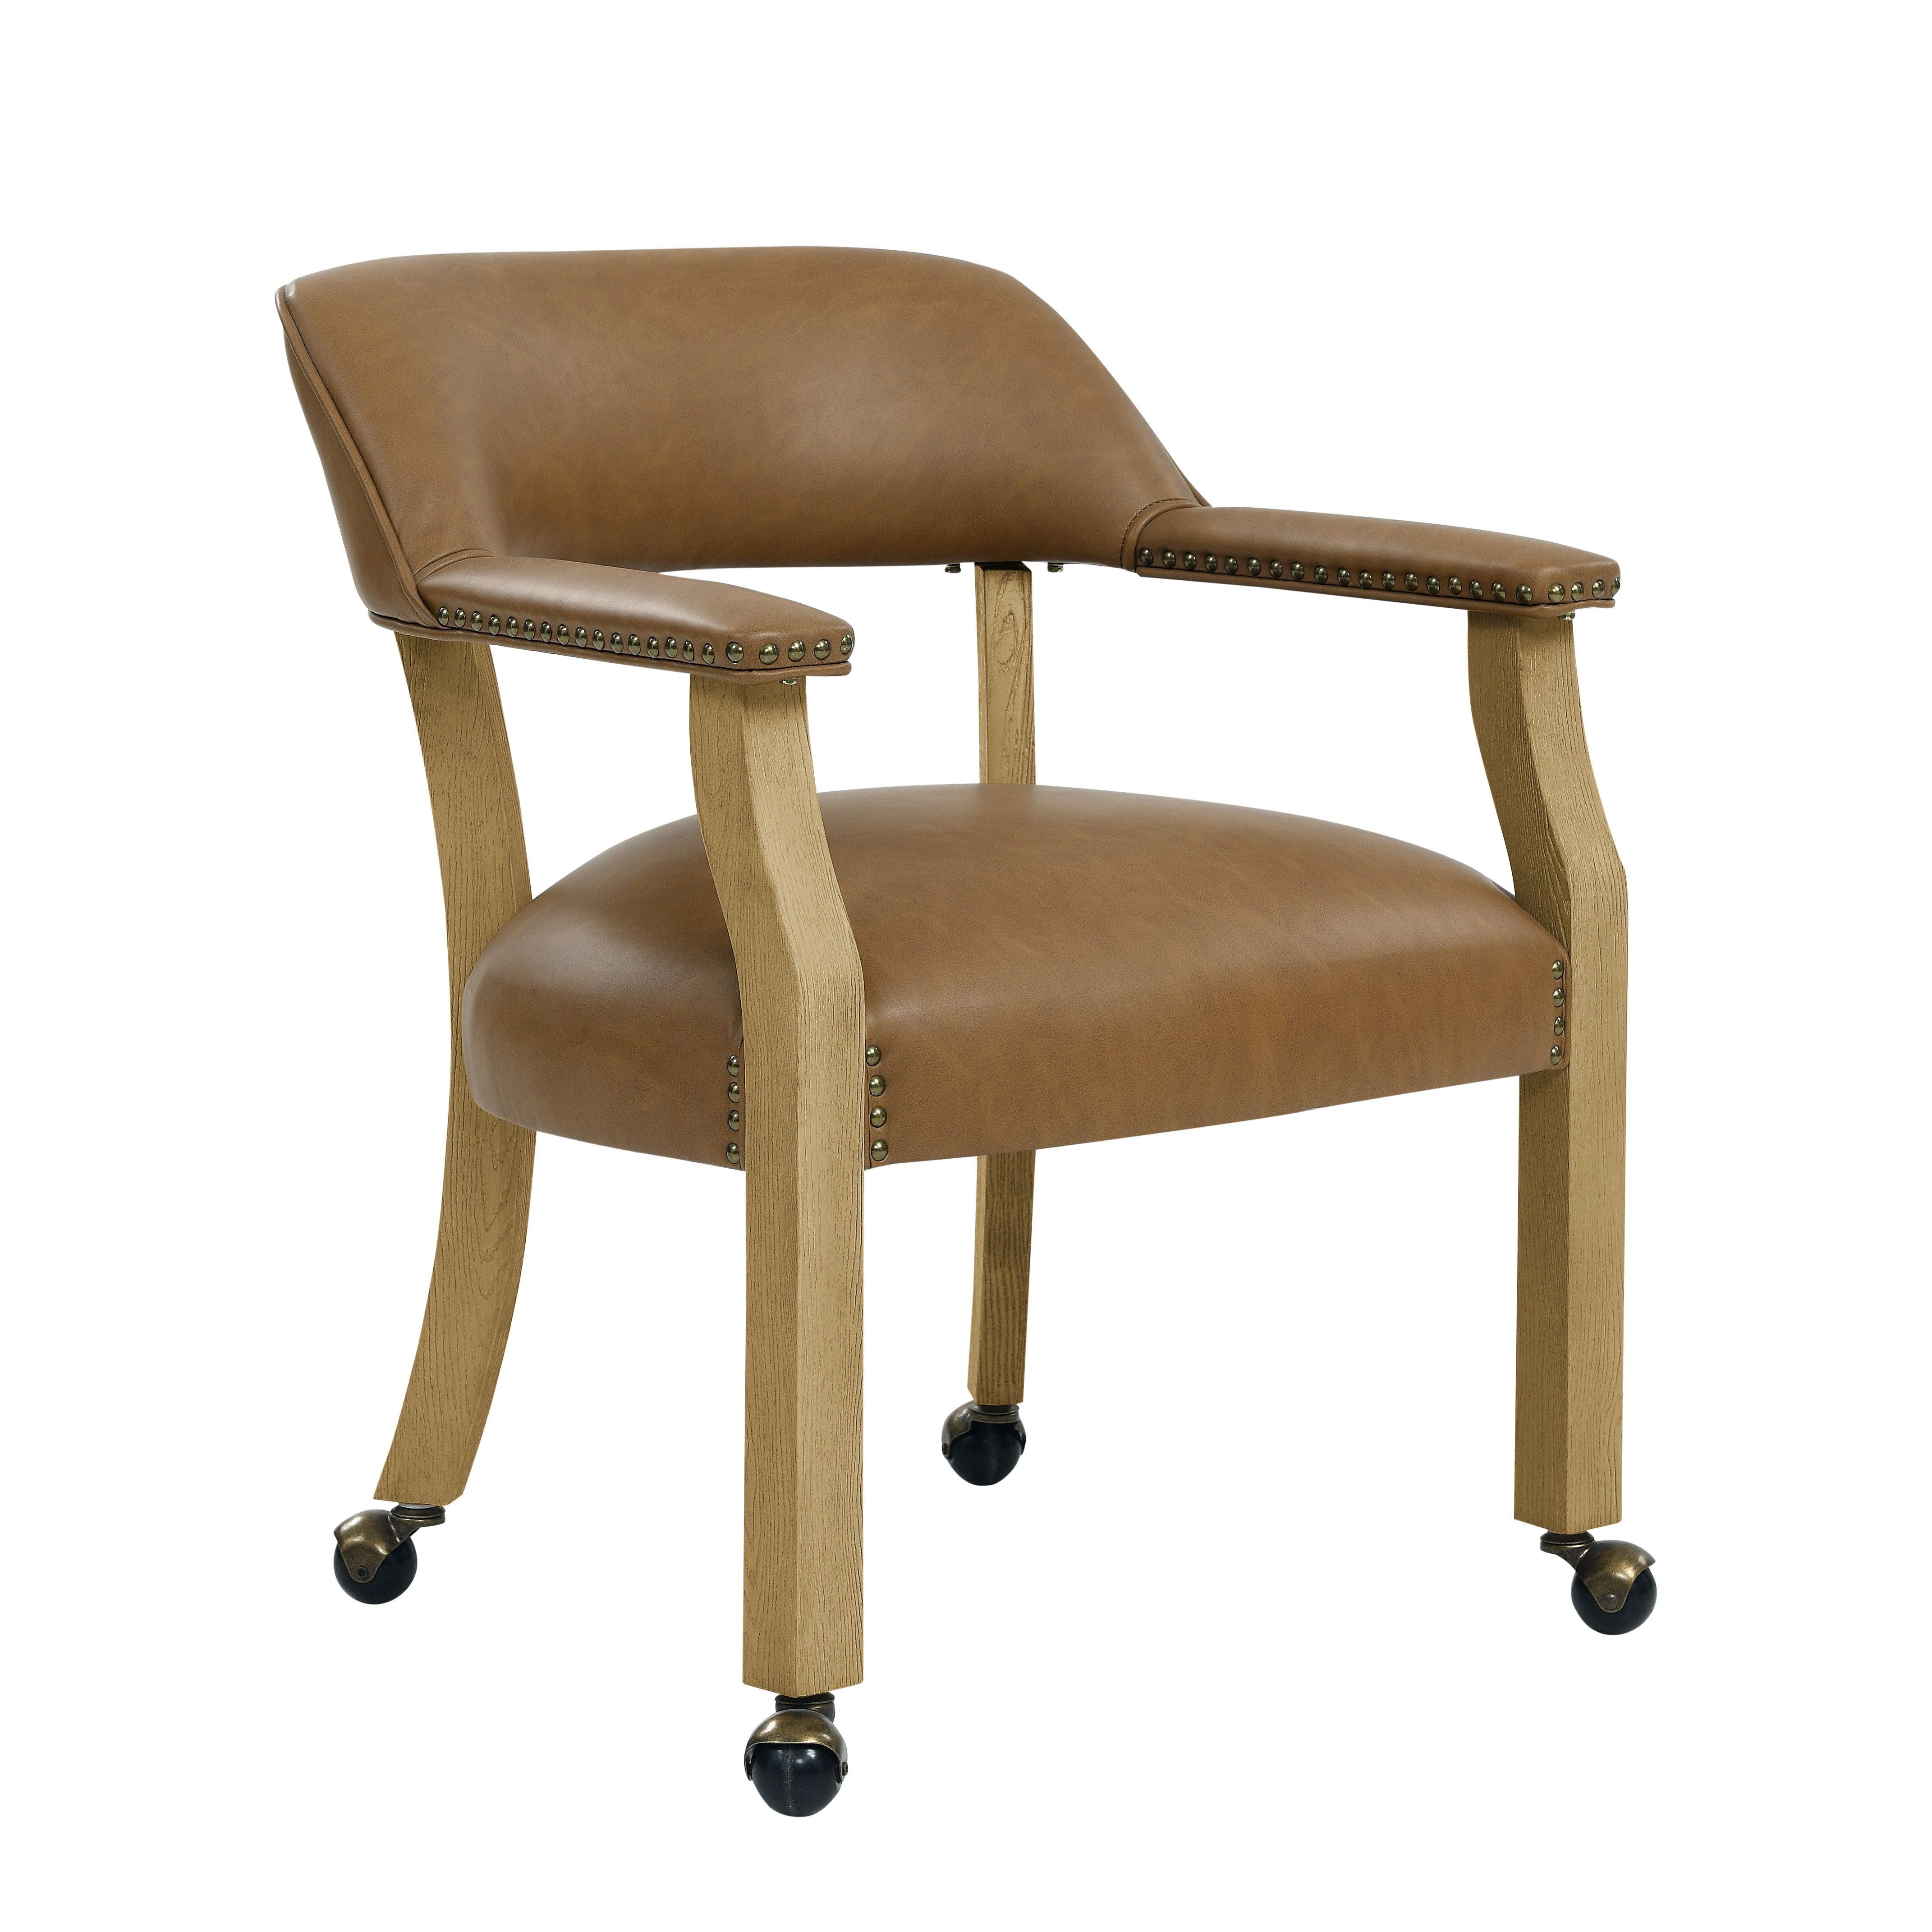 Steve Silver Furniture - Rylie - Castered Captain's Chair - Camel - 5th Avenue Furniture